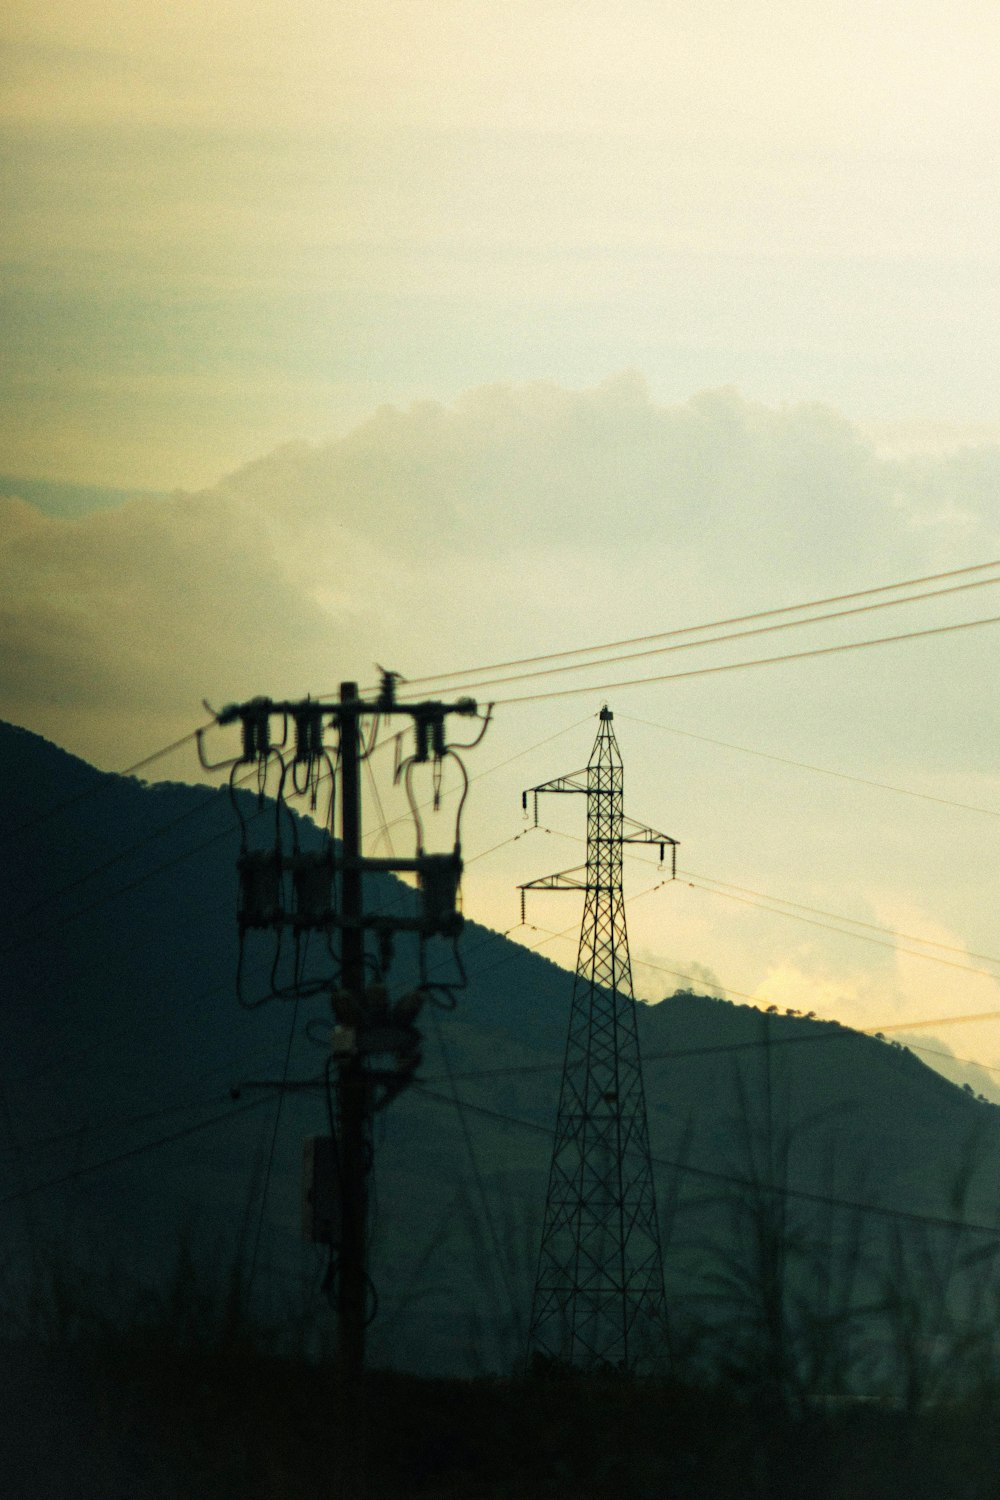 a view of a mountain with power lines in the foreground